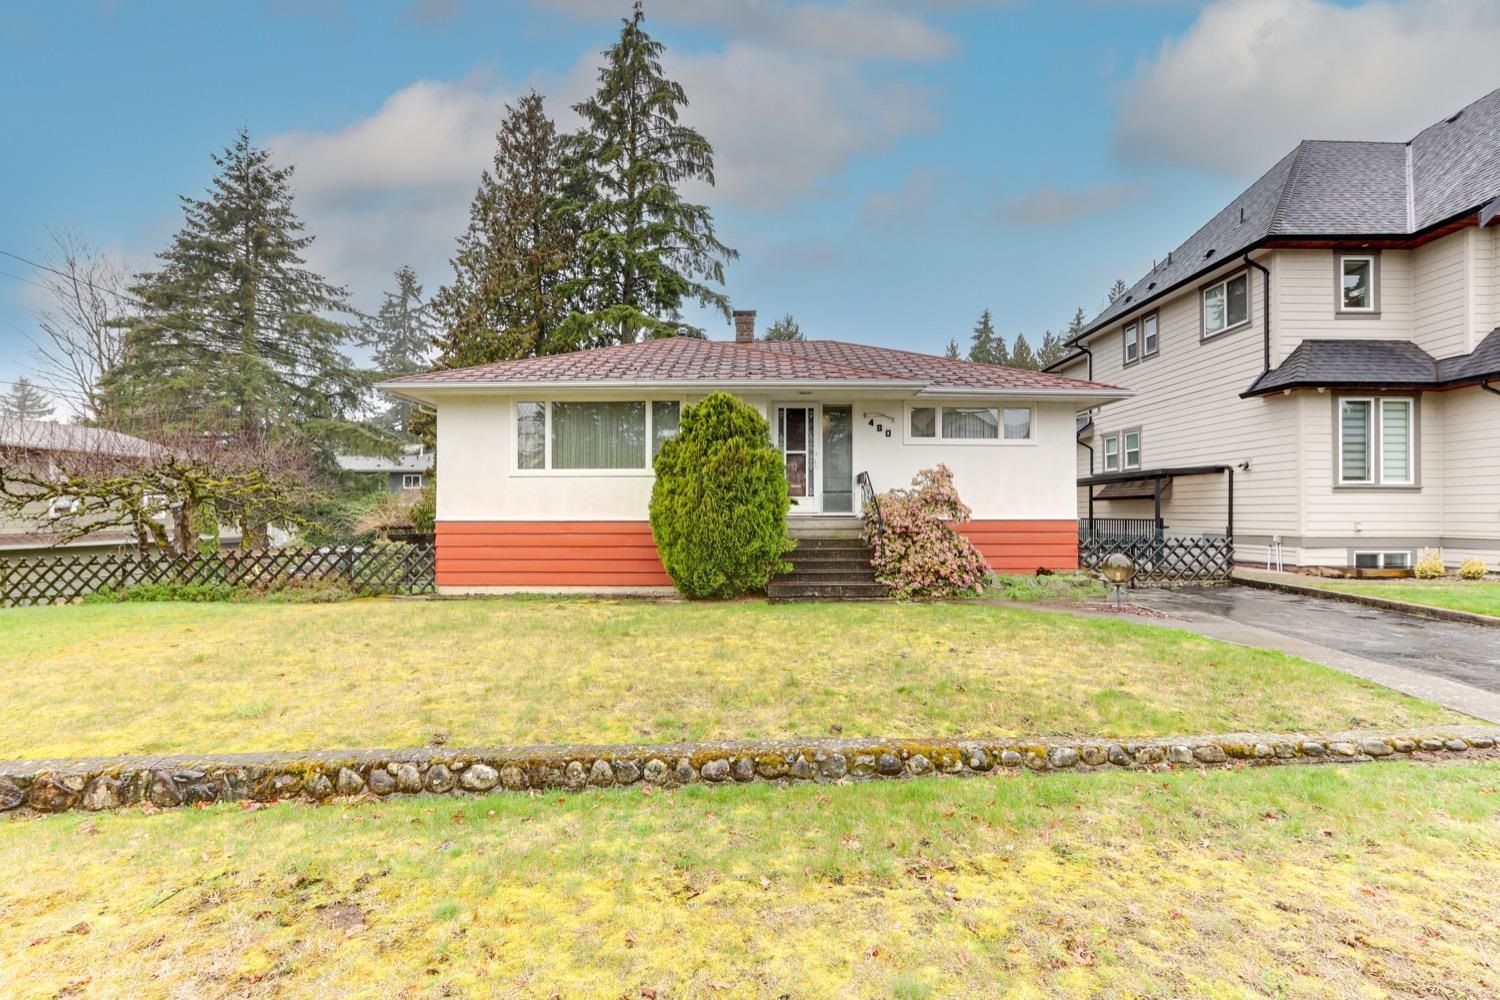 We have just sold a property at 480 MONTGOMERY ST in Coquitlam